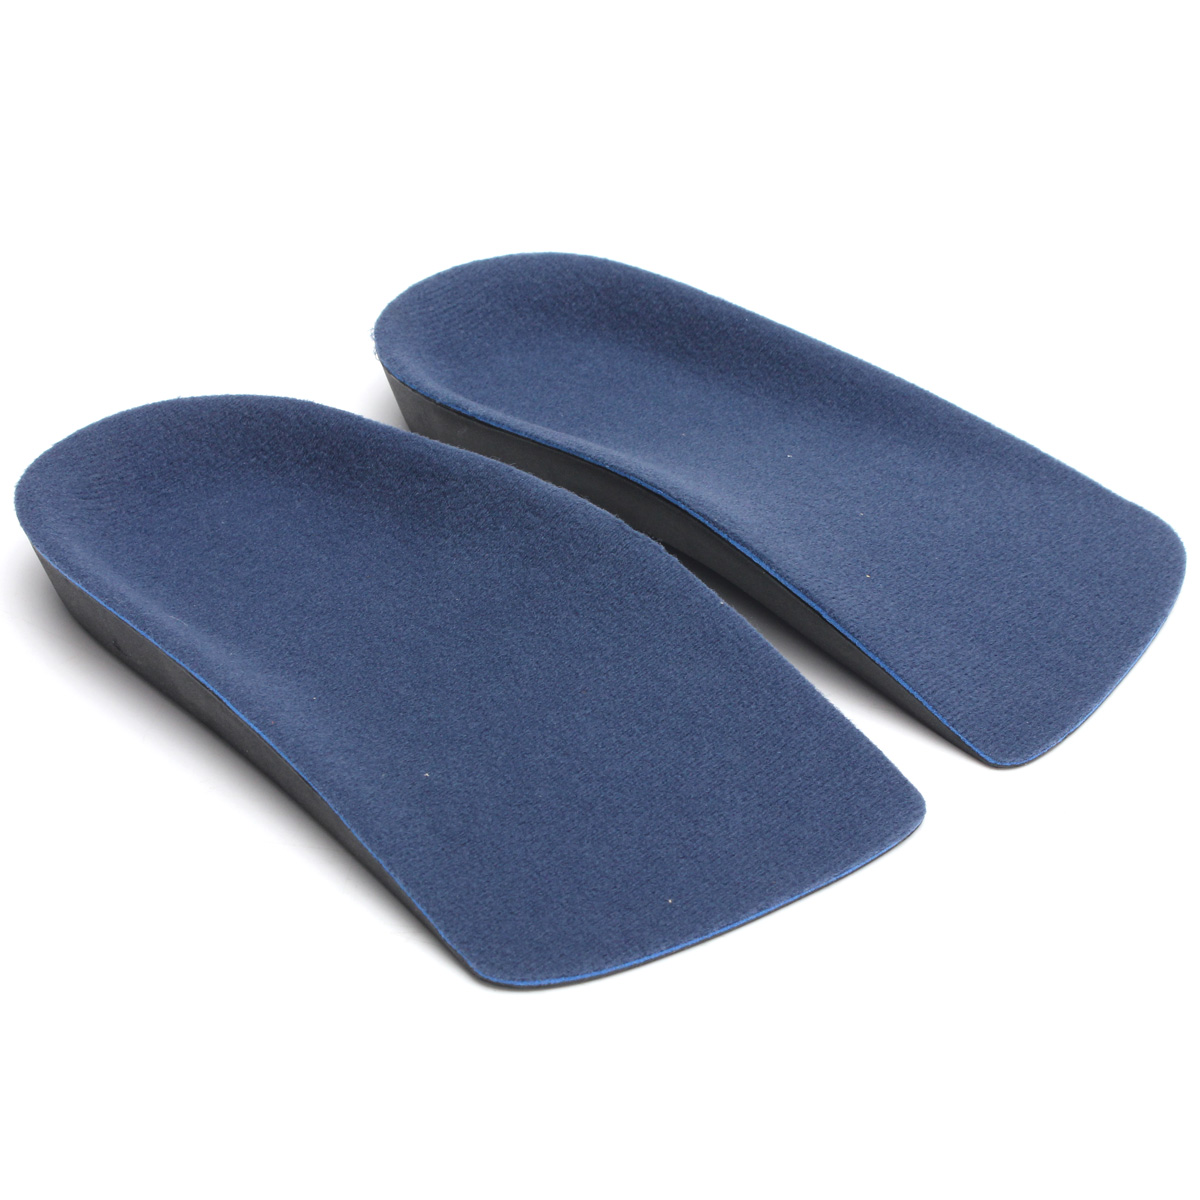 Durable-34-Orthotic-Insoles-Heel-Arch-Support-Plantar-Fasciitis-Feet-Pronation-Shoes-1242540